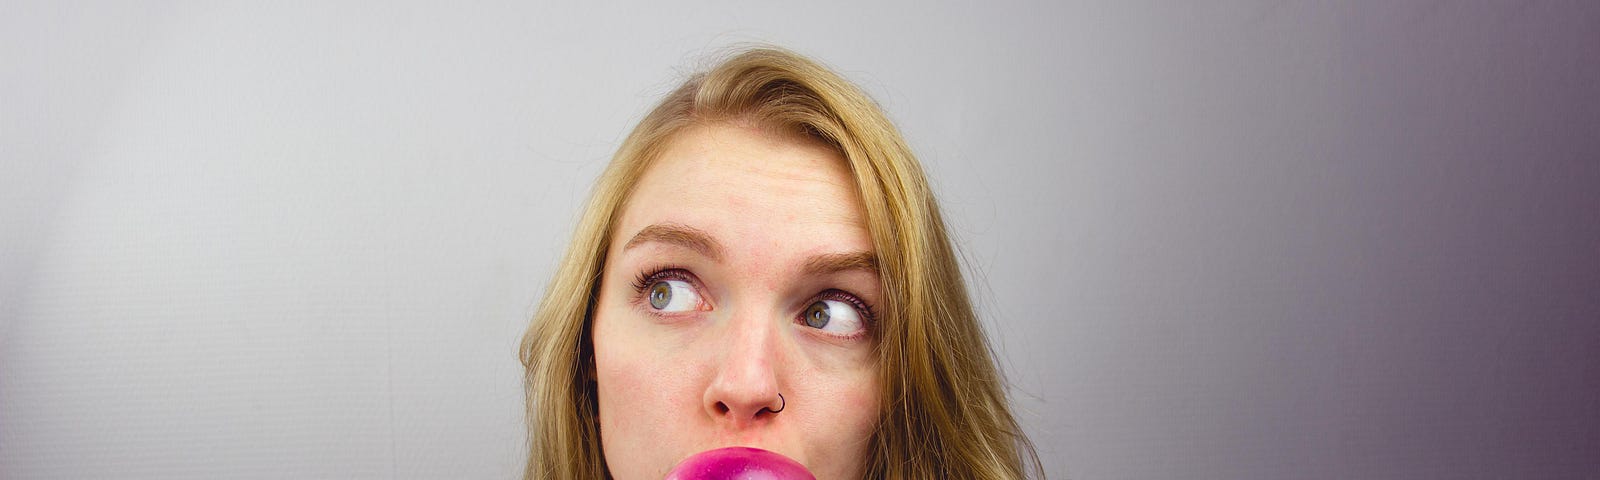 A young woman blowing bubble gum